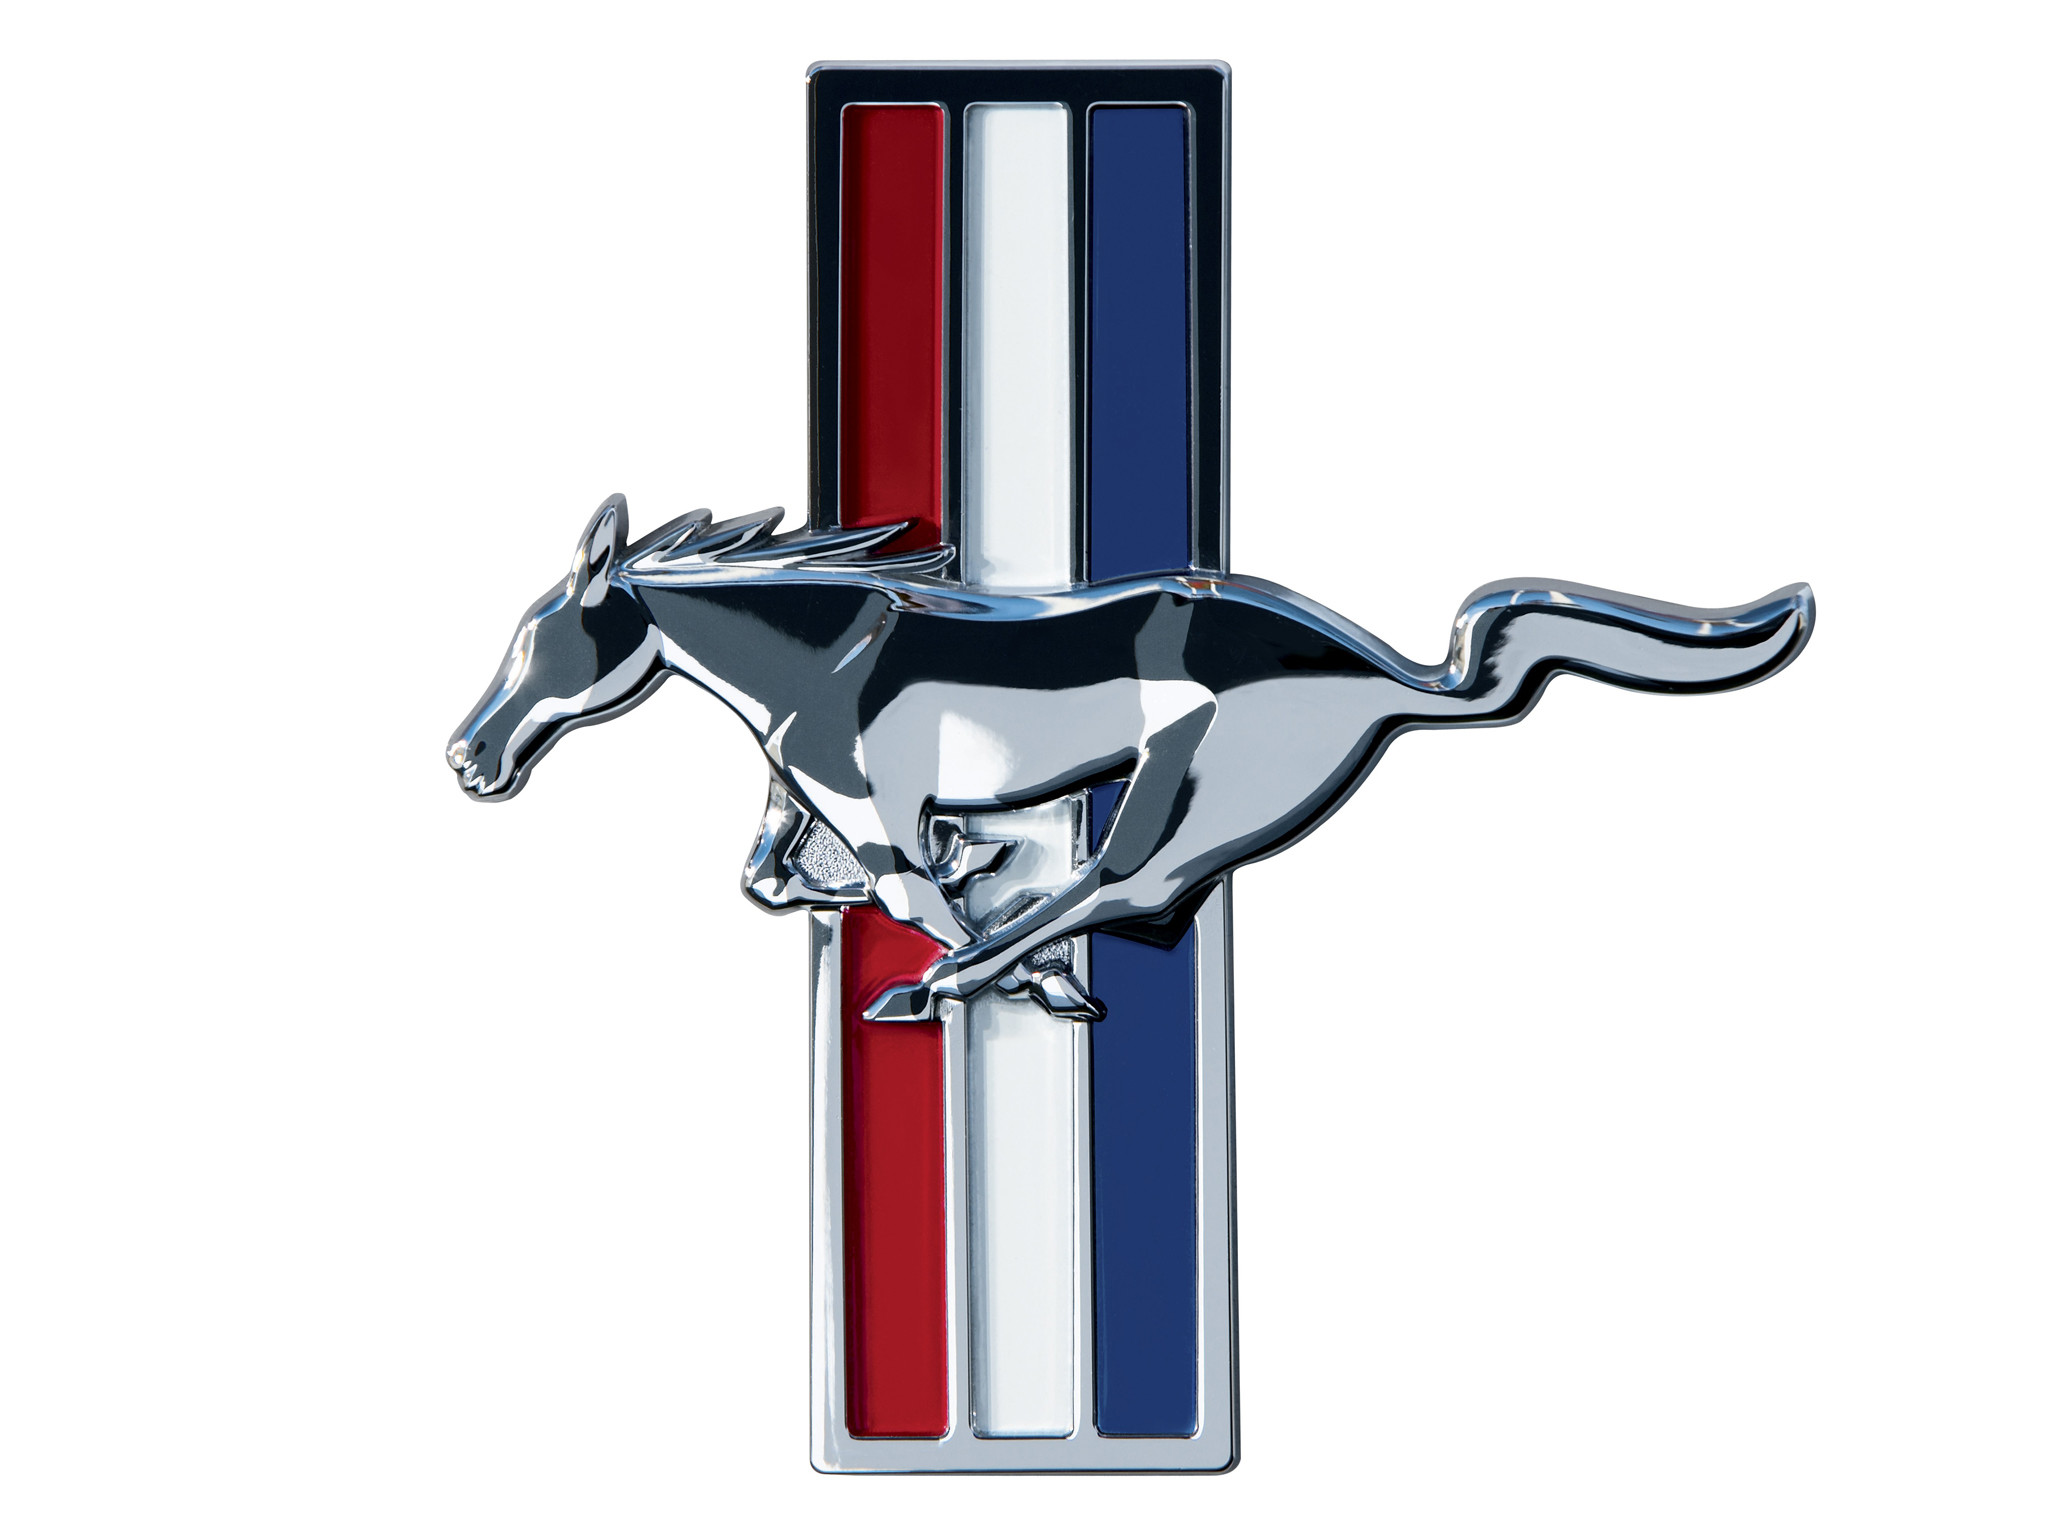 2048x1536 Vehicles - Ford Mustang Ford Logo Wallpaper